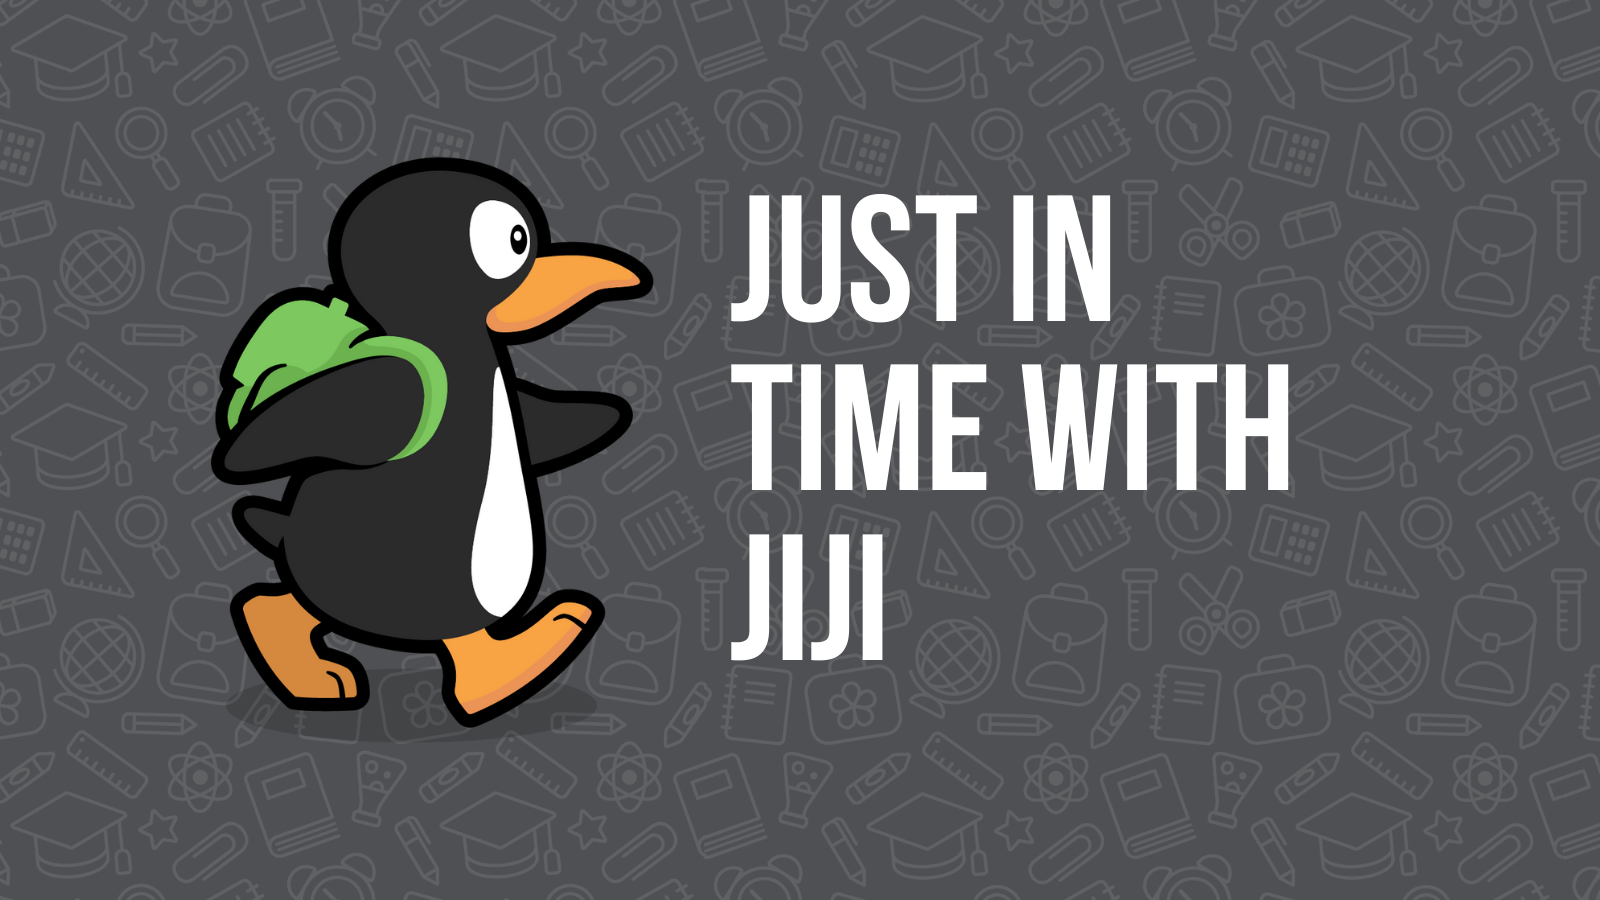 October 2021 Updates: Just in Time with JiJi